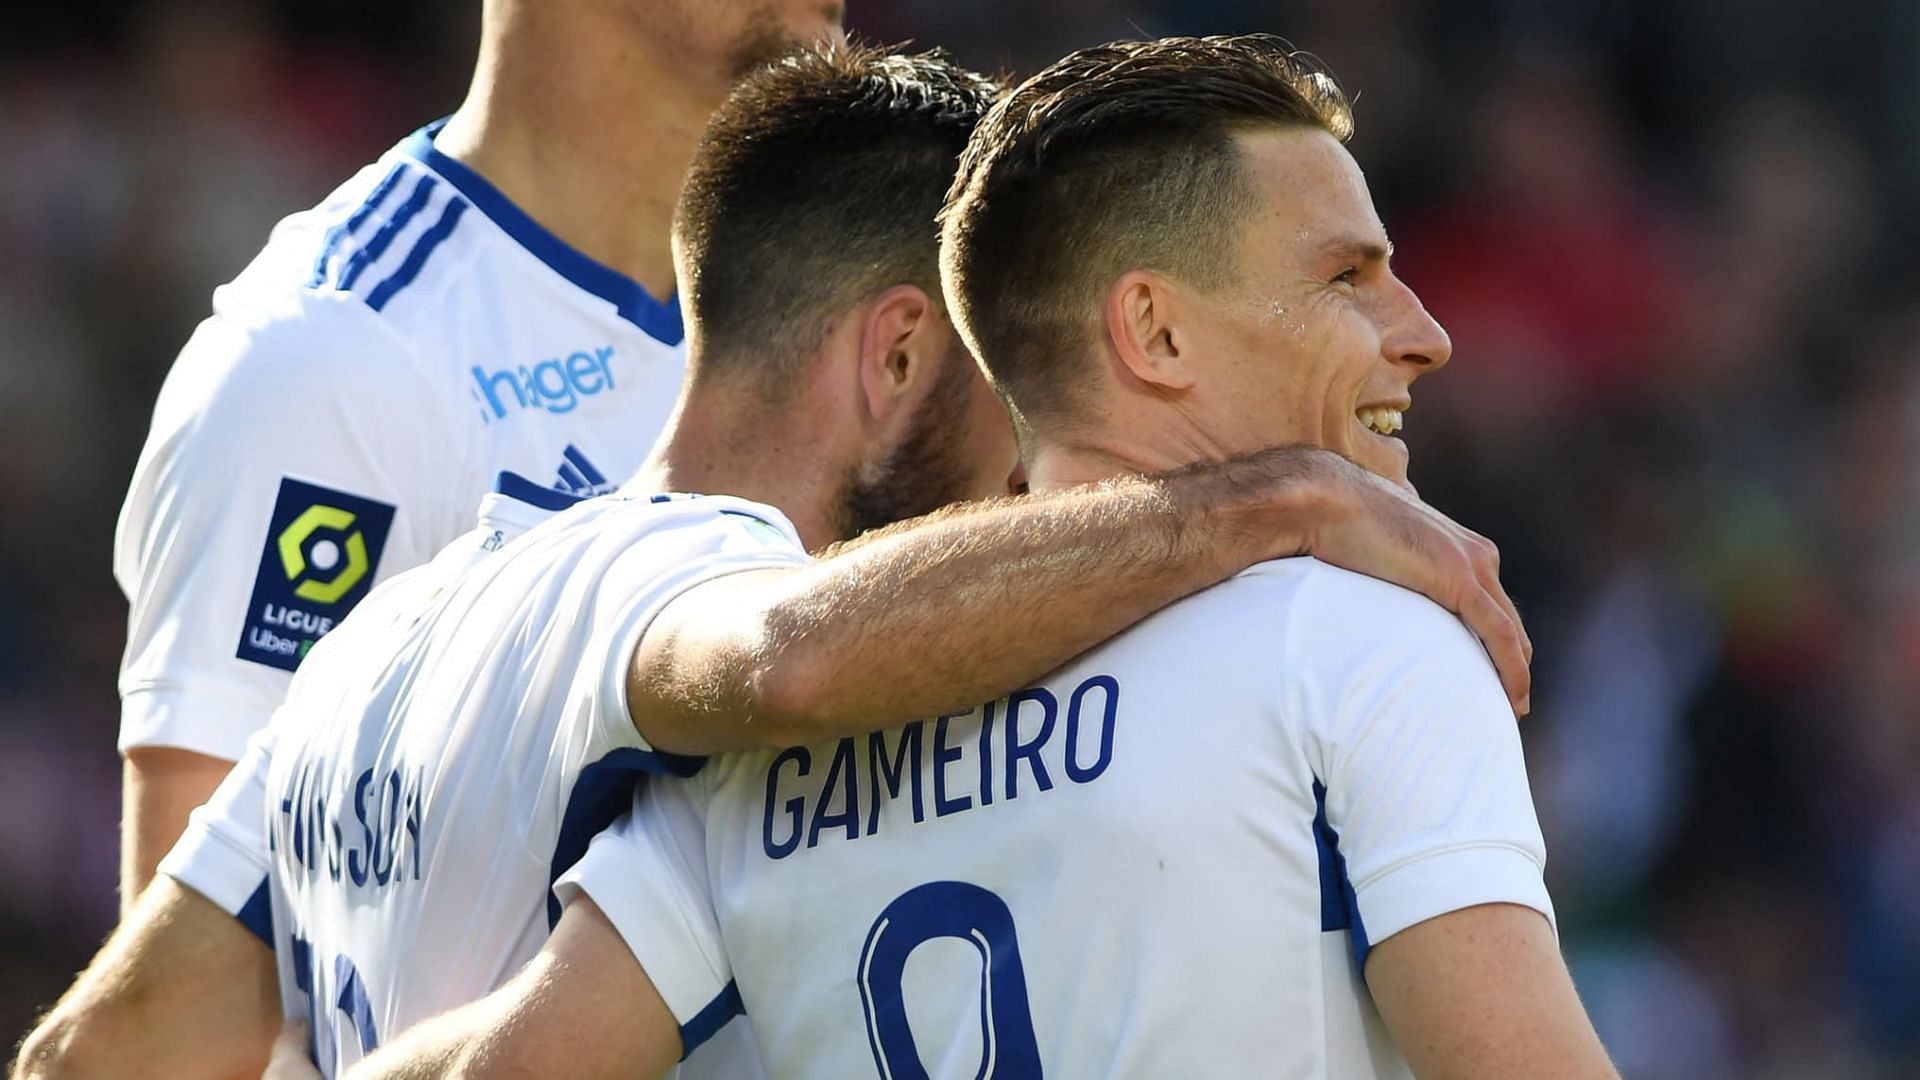 Can Kevin Gameiro find the net again when Strasbourg face Clermont this weekend?